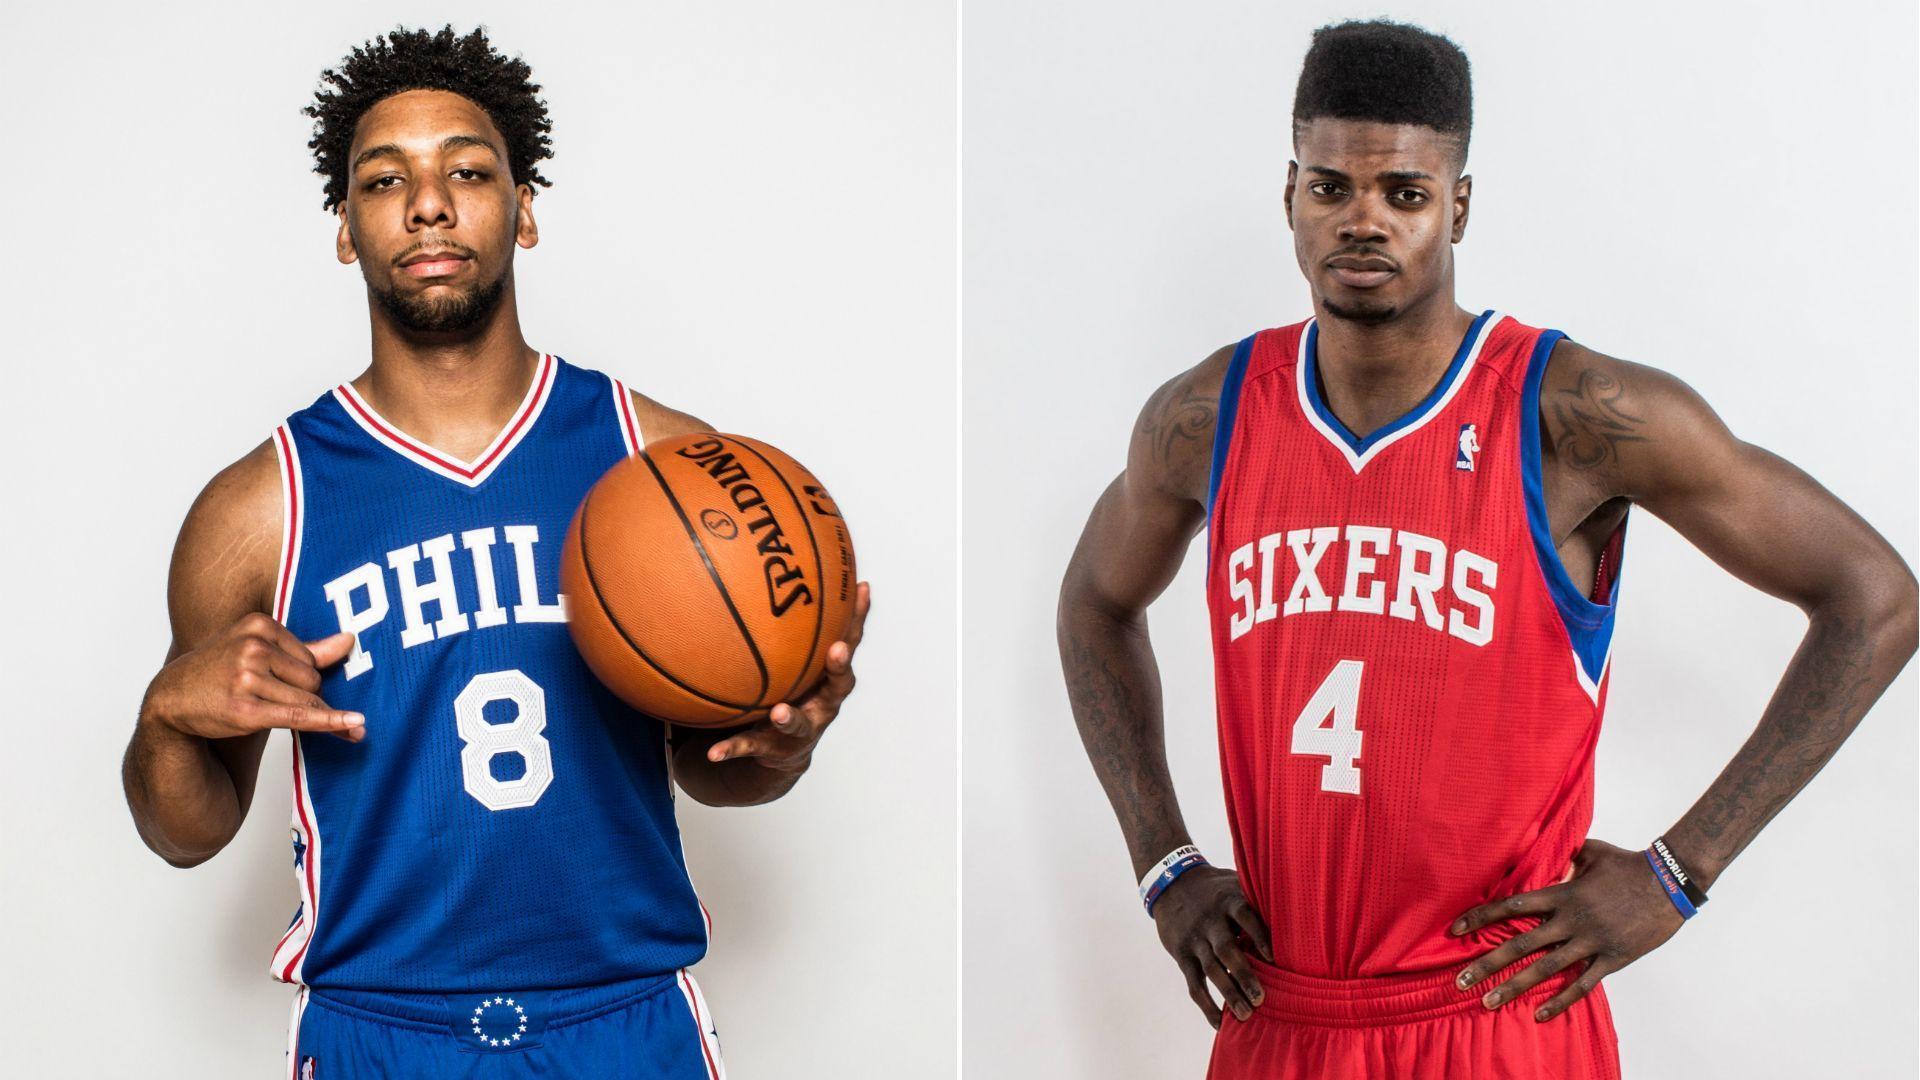 Jahlil Okafor and Nerlens Noel were built to play together. NBA